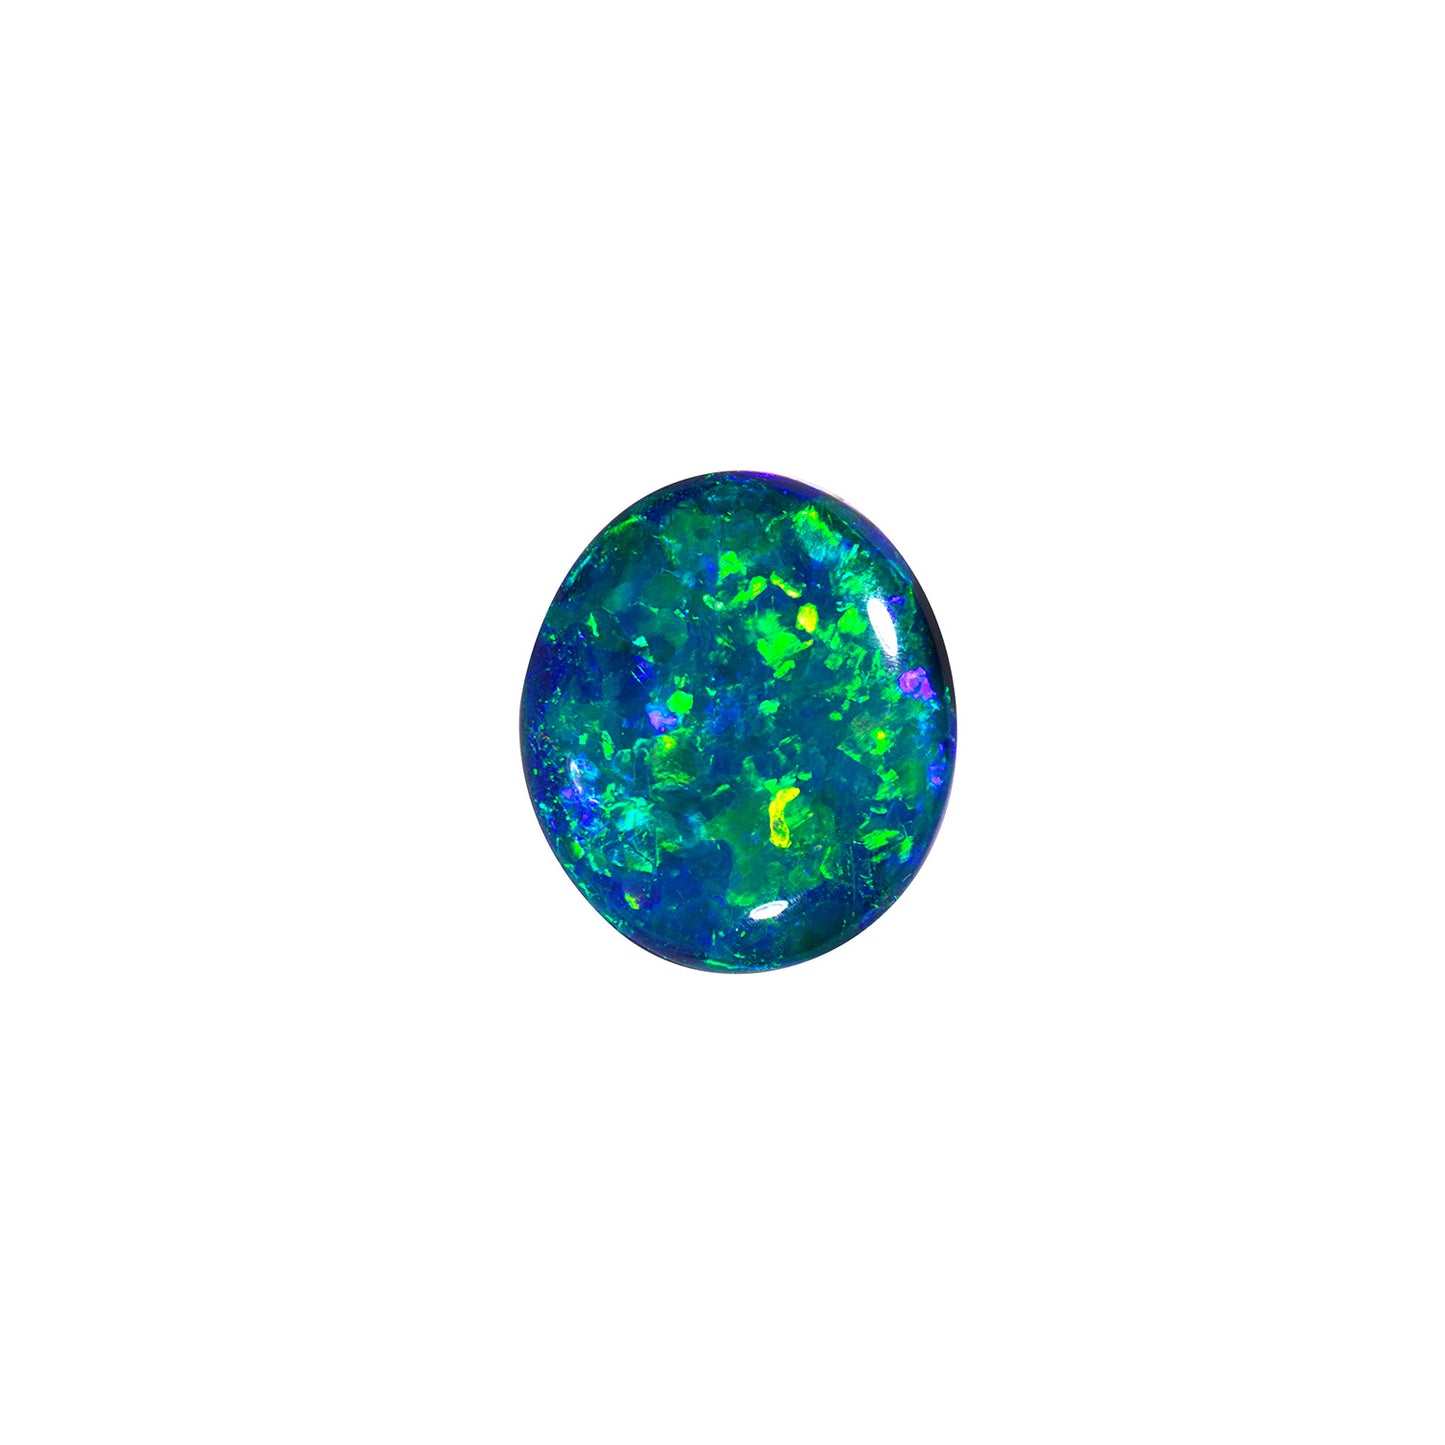 2.56 carat Australian black opal, 13.6 x 9.6 x 3.3 millimeters, displaying vibrant blue and green colors. Ideal for a show-stopping jewelry design.